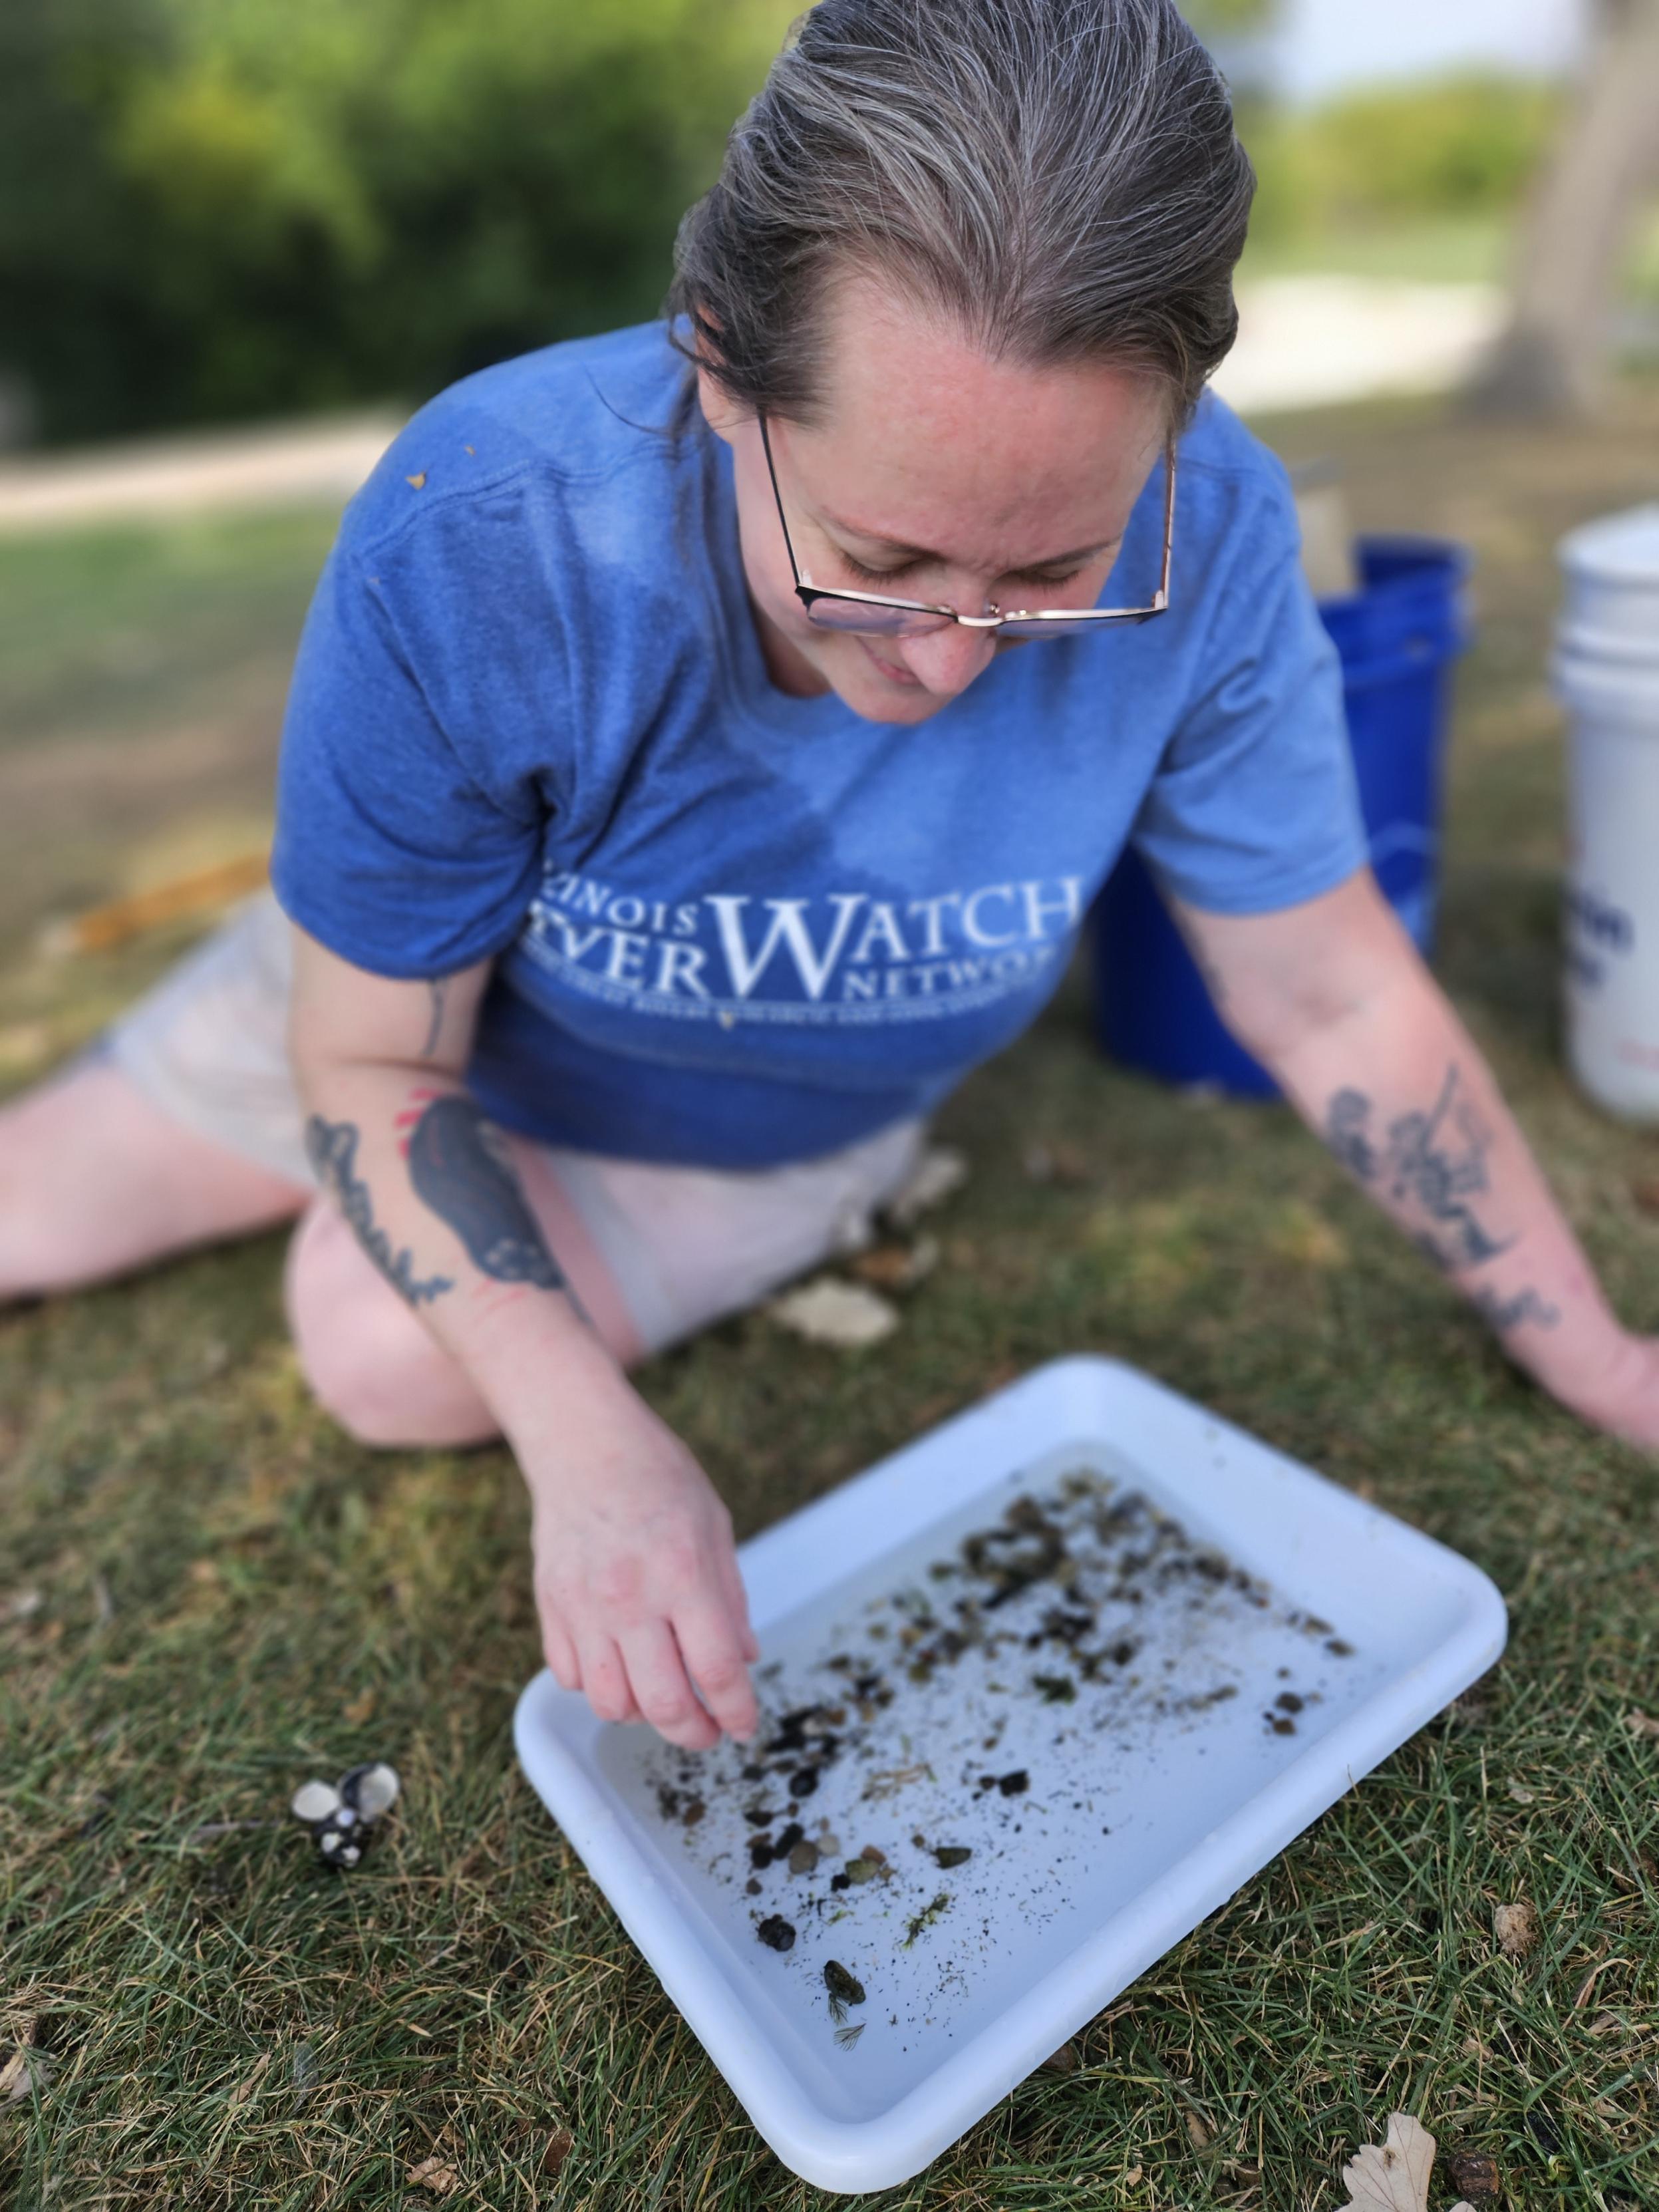 An Illinois RiverWatch volunteer looks for water bugs in a sample. (Photo by Caroline Teter)